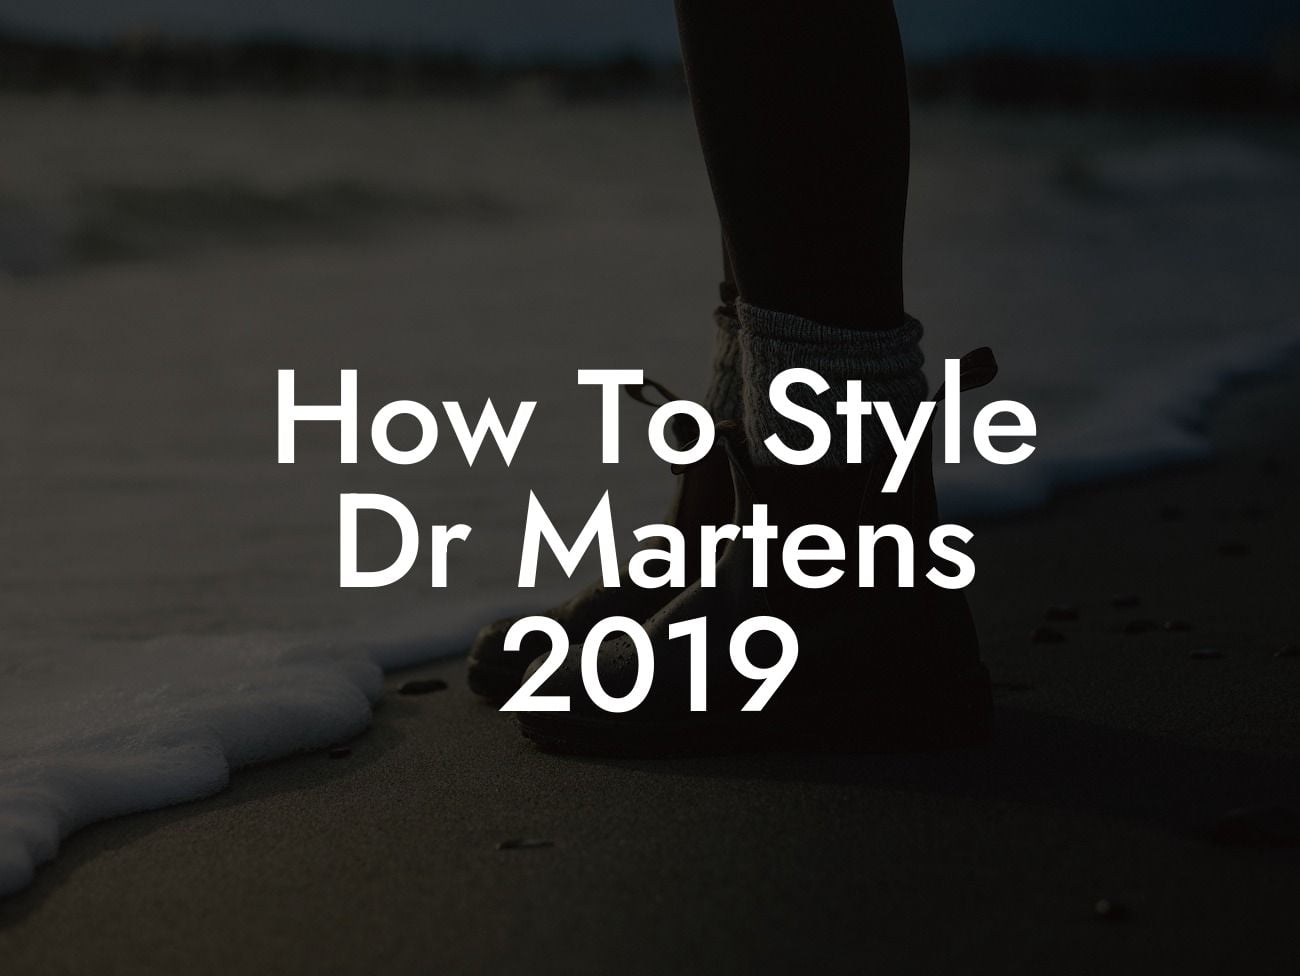 How To Style Dr Martens 2019